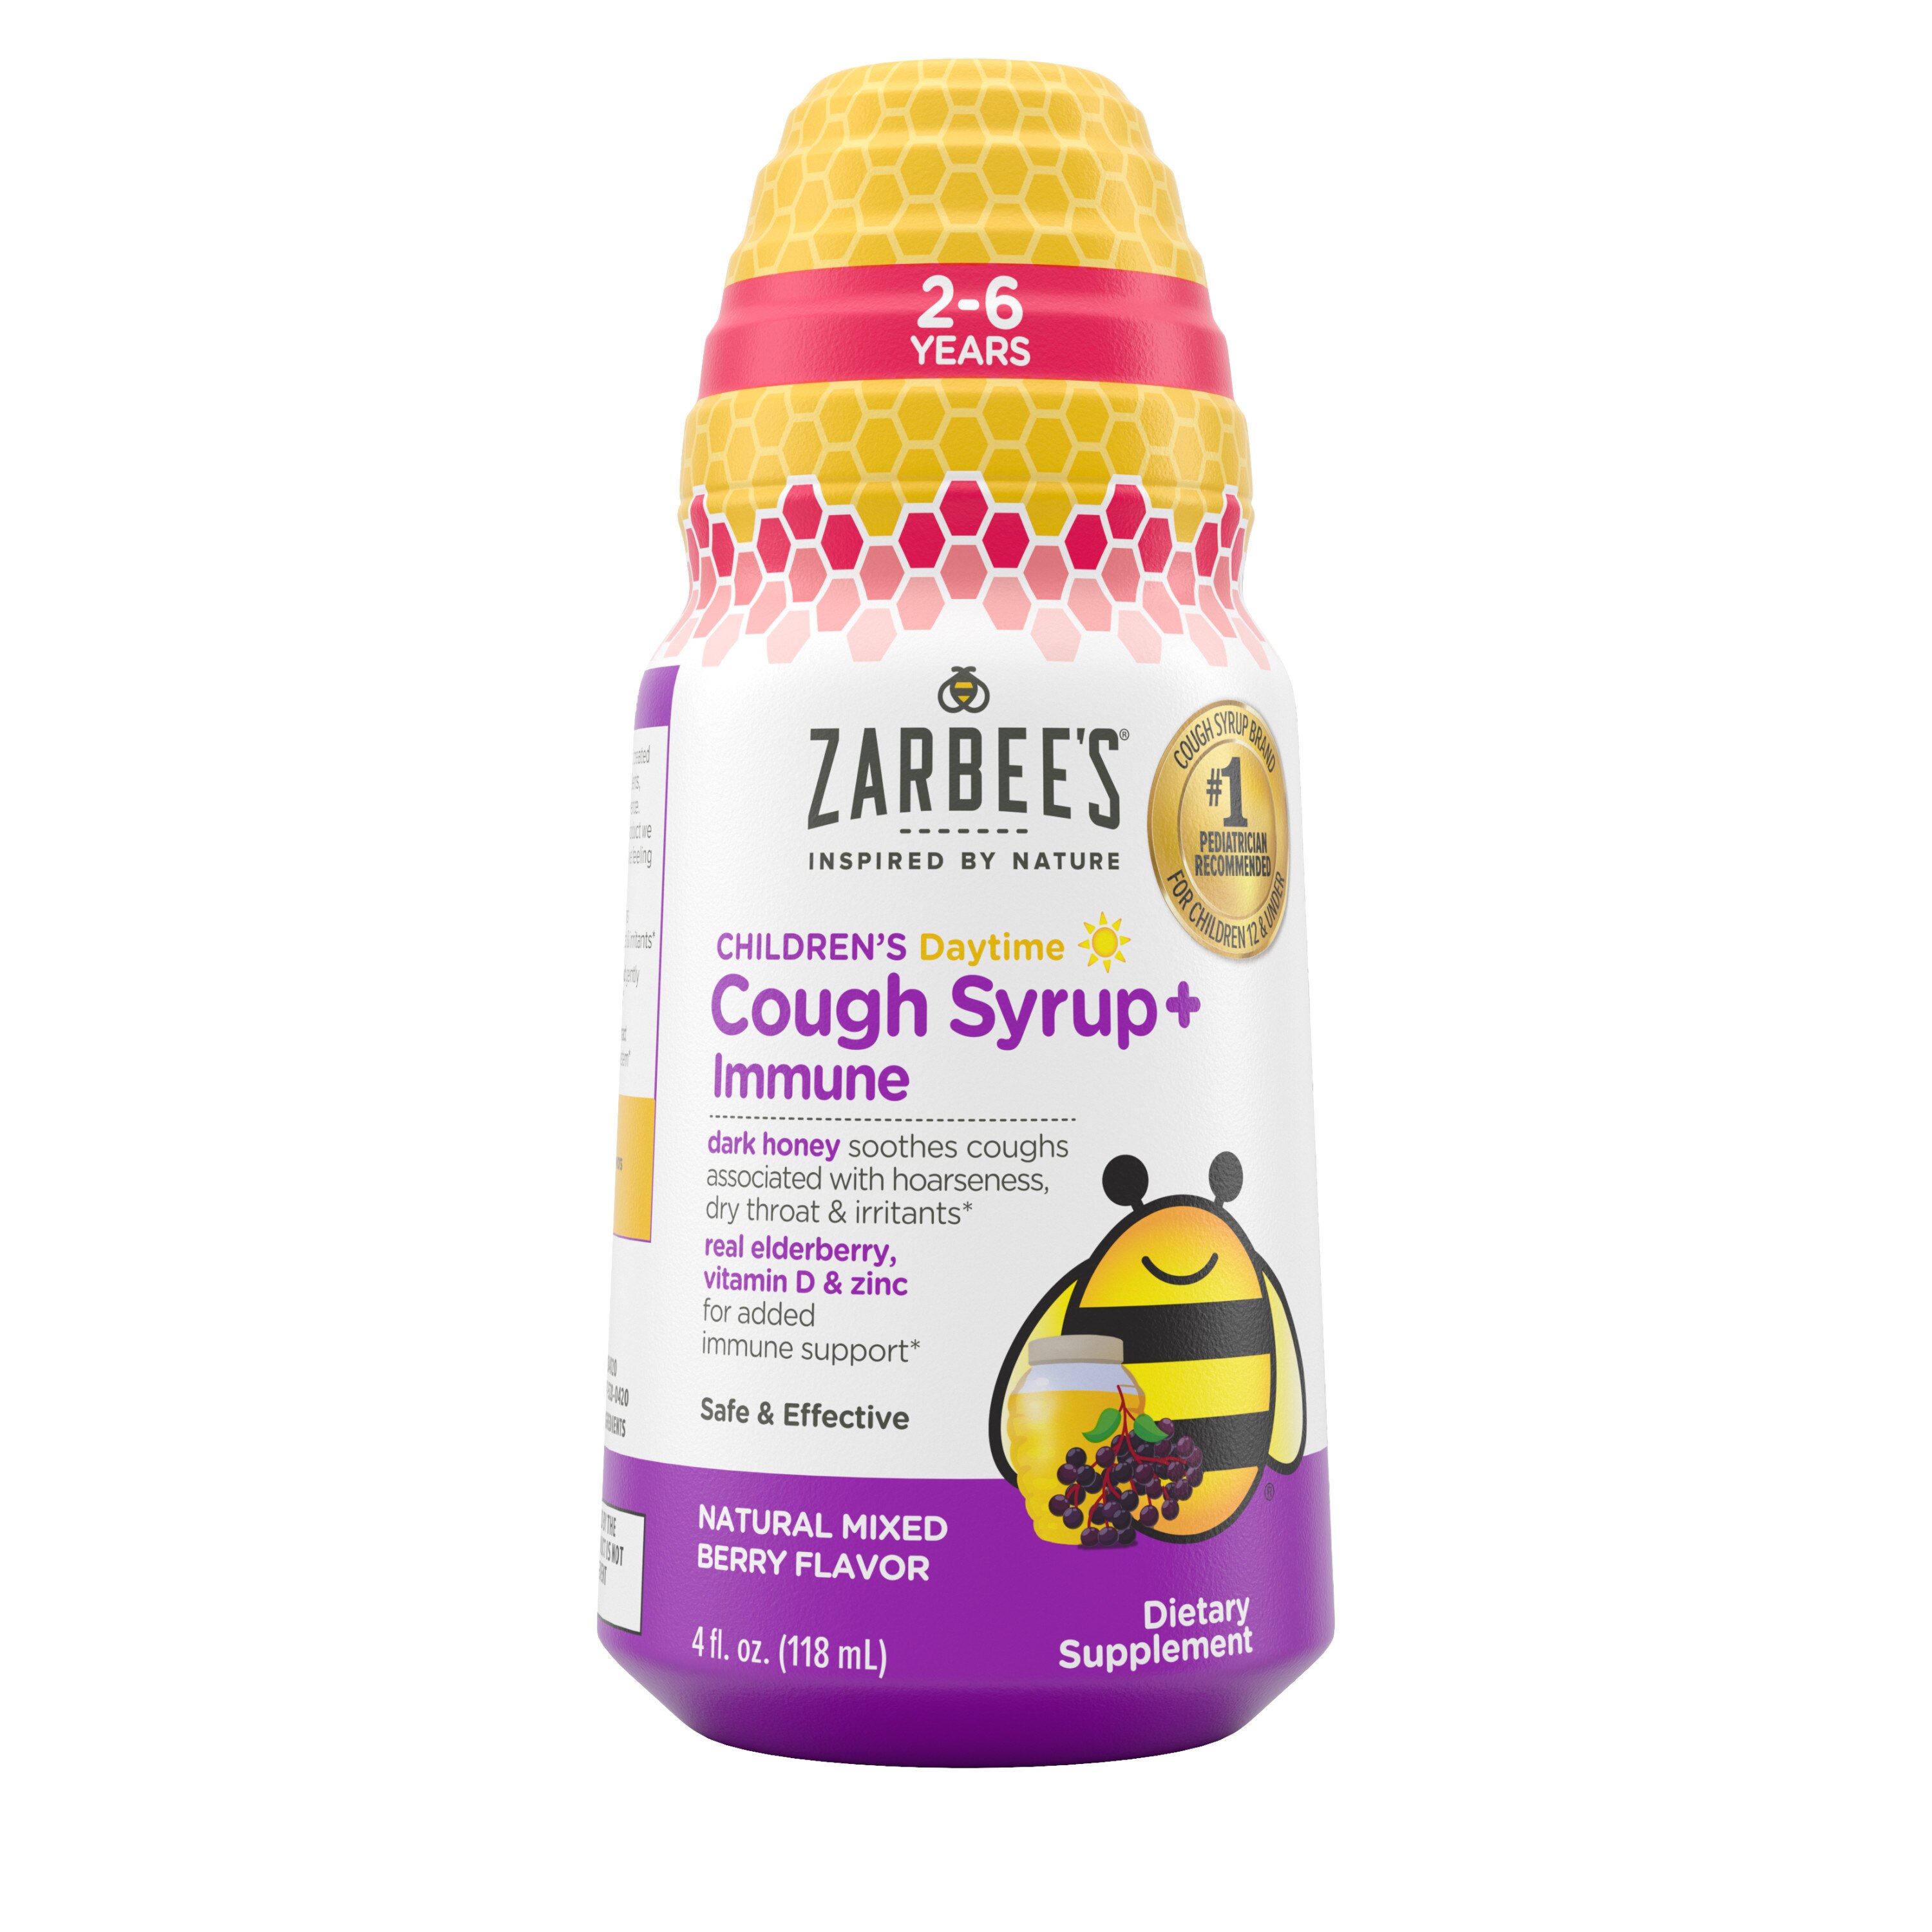 Zarbee's Kids Cough + Immune Daytime for Ages 2-6 with Honey, Vitamin D & Zinc, Mixed Berry, 4 fl oz